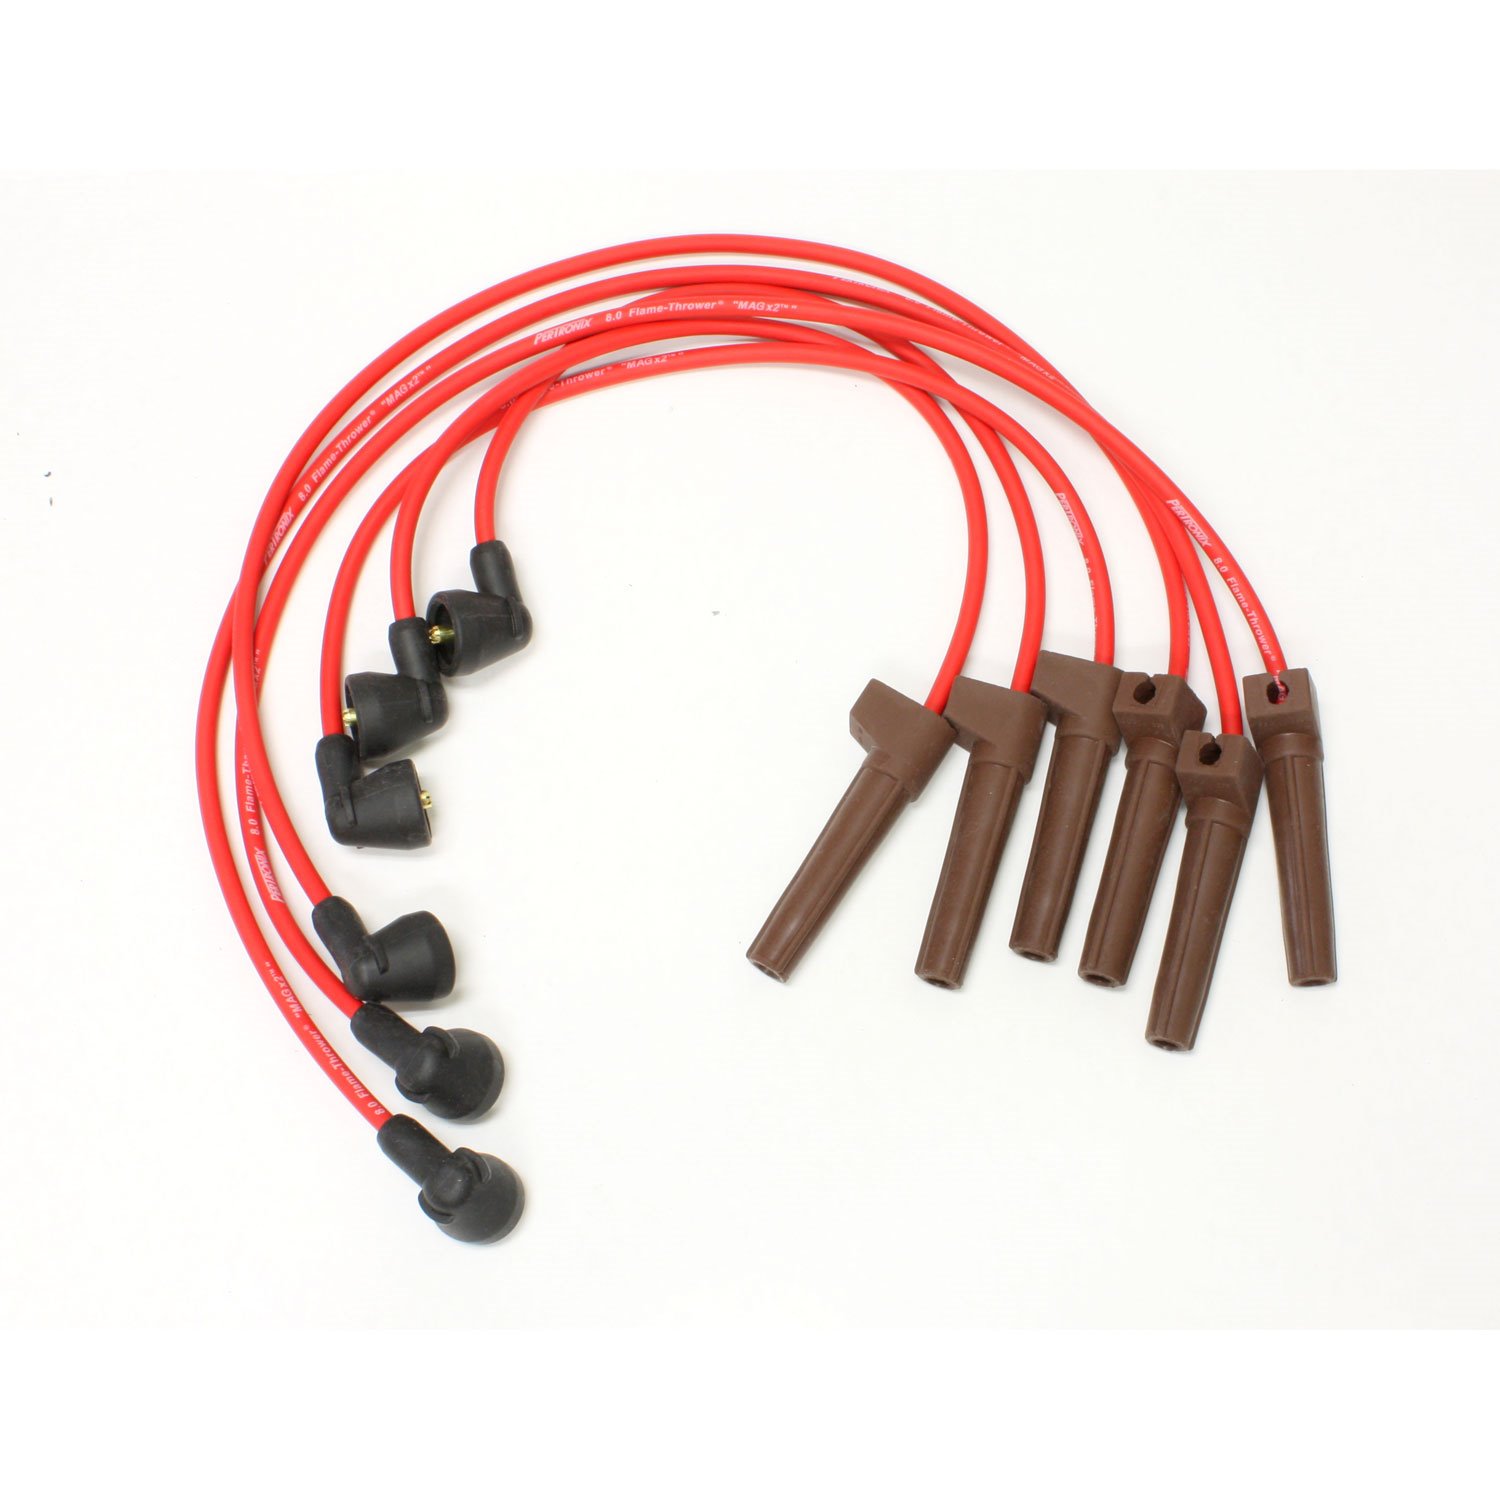 PerTronix 806420 Flame-Thrower Spark Plug Wires 6 cyl Ford Custom Fit Red